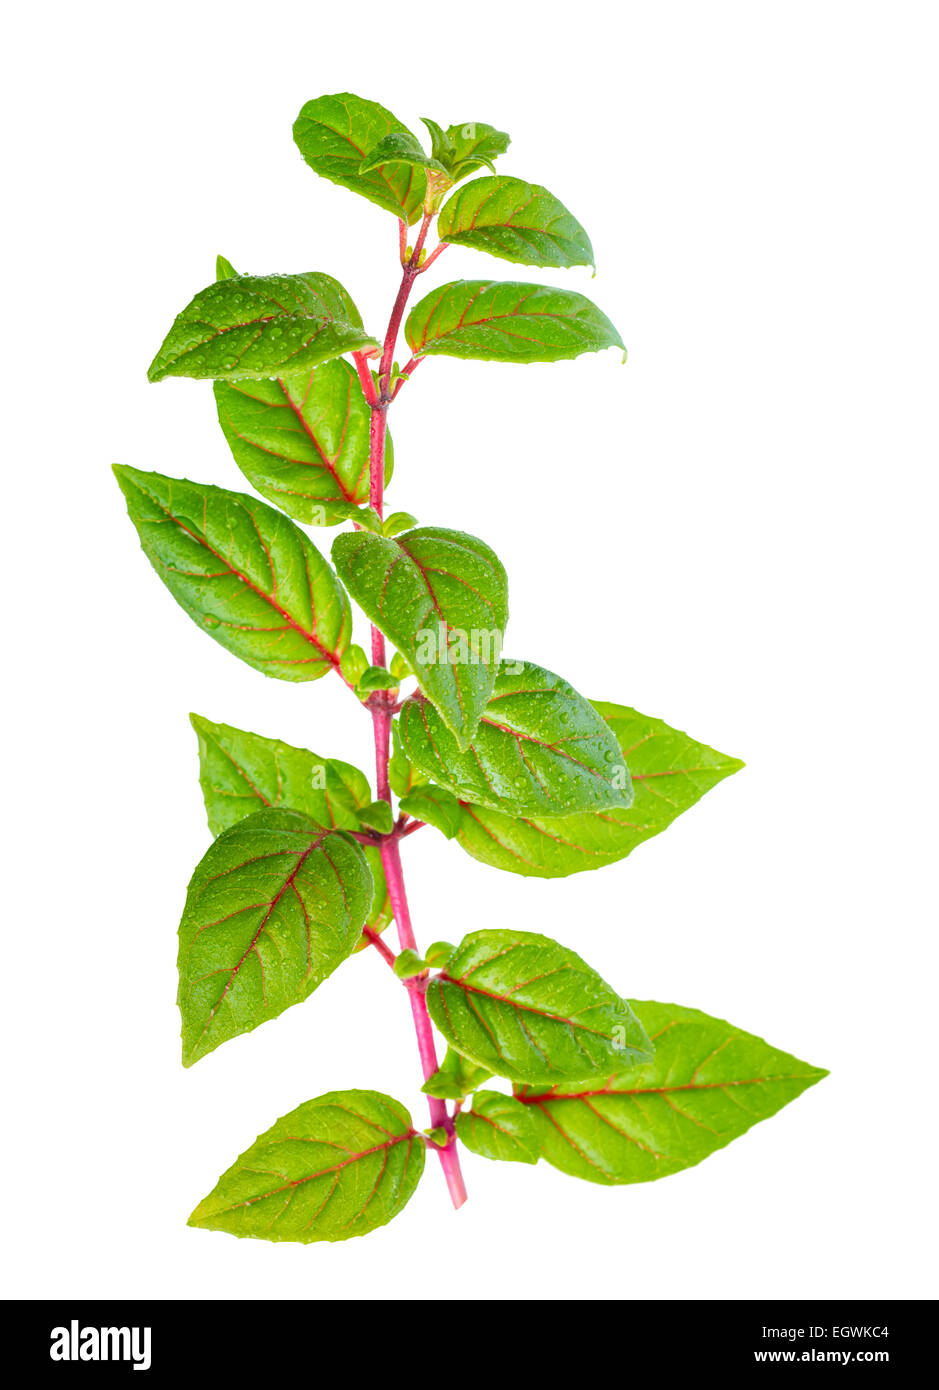 green branch of fuchsia with red veins with dew is isolated on white background, closeup Stock Photo